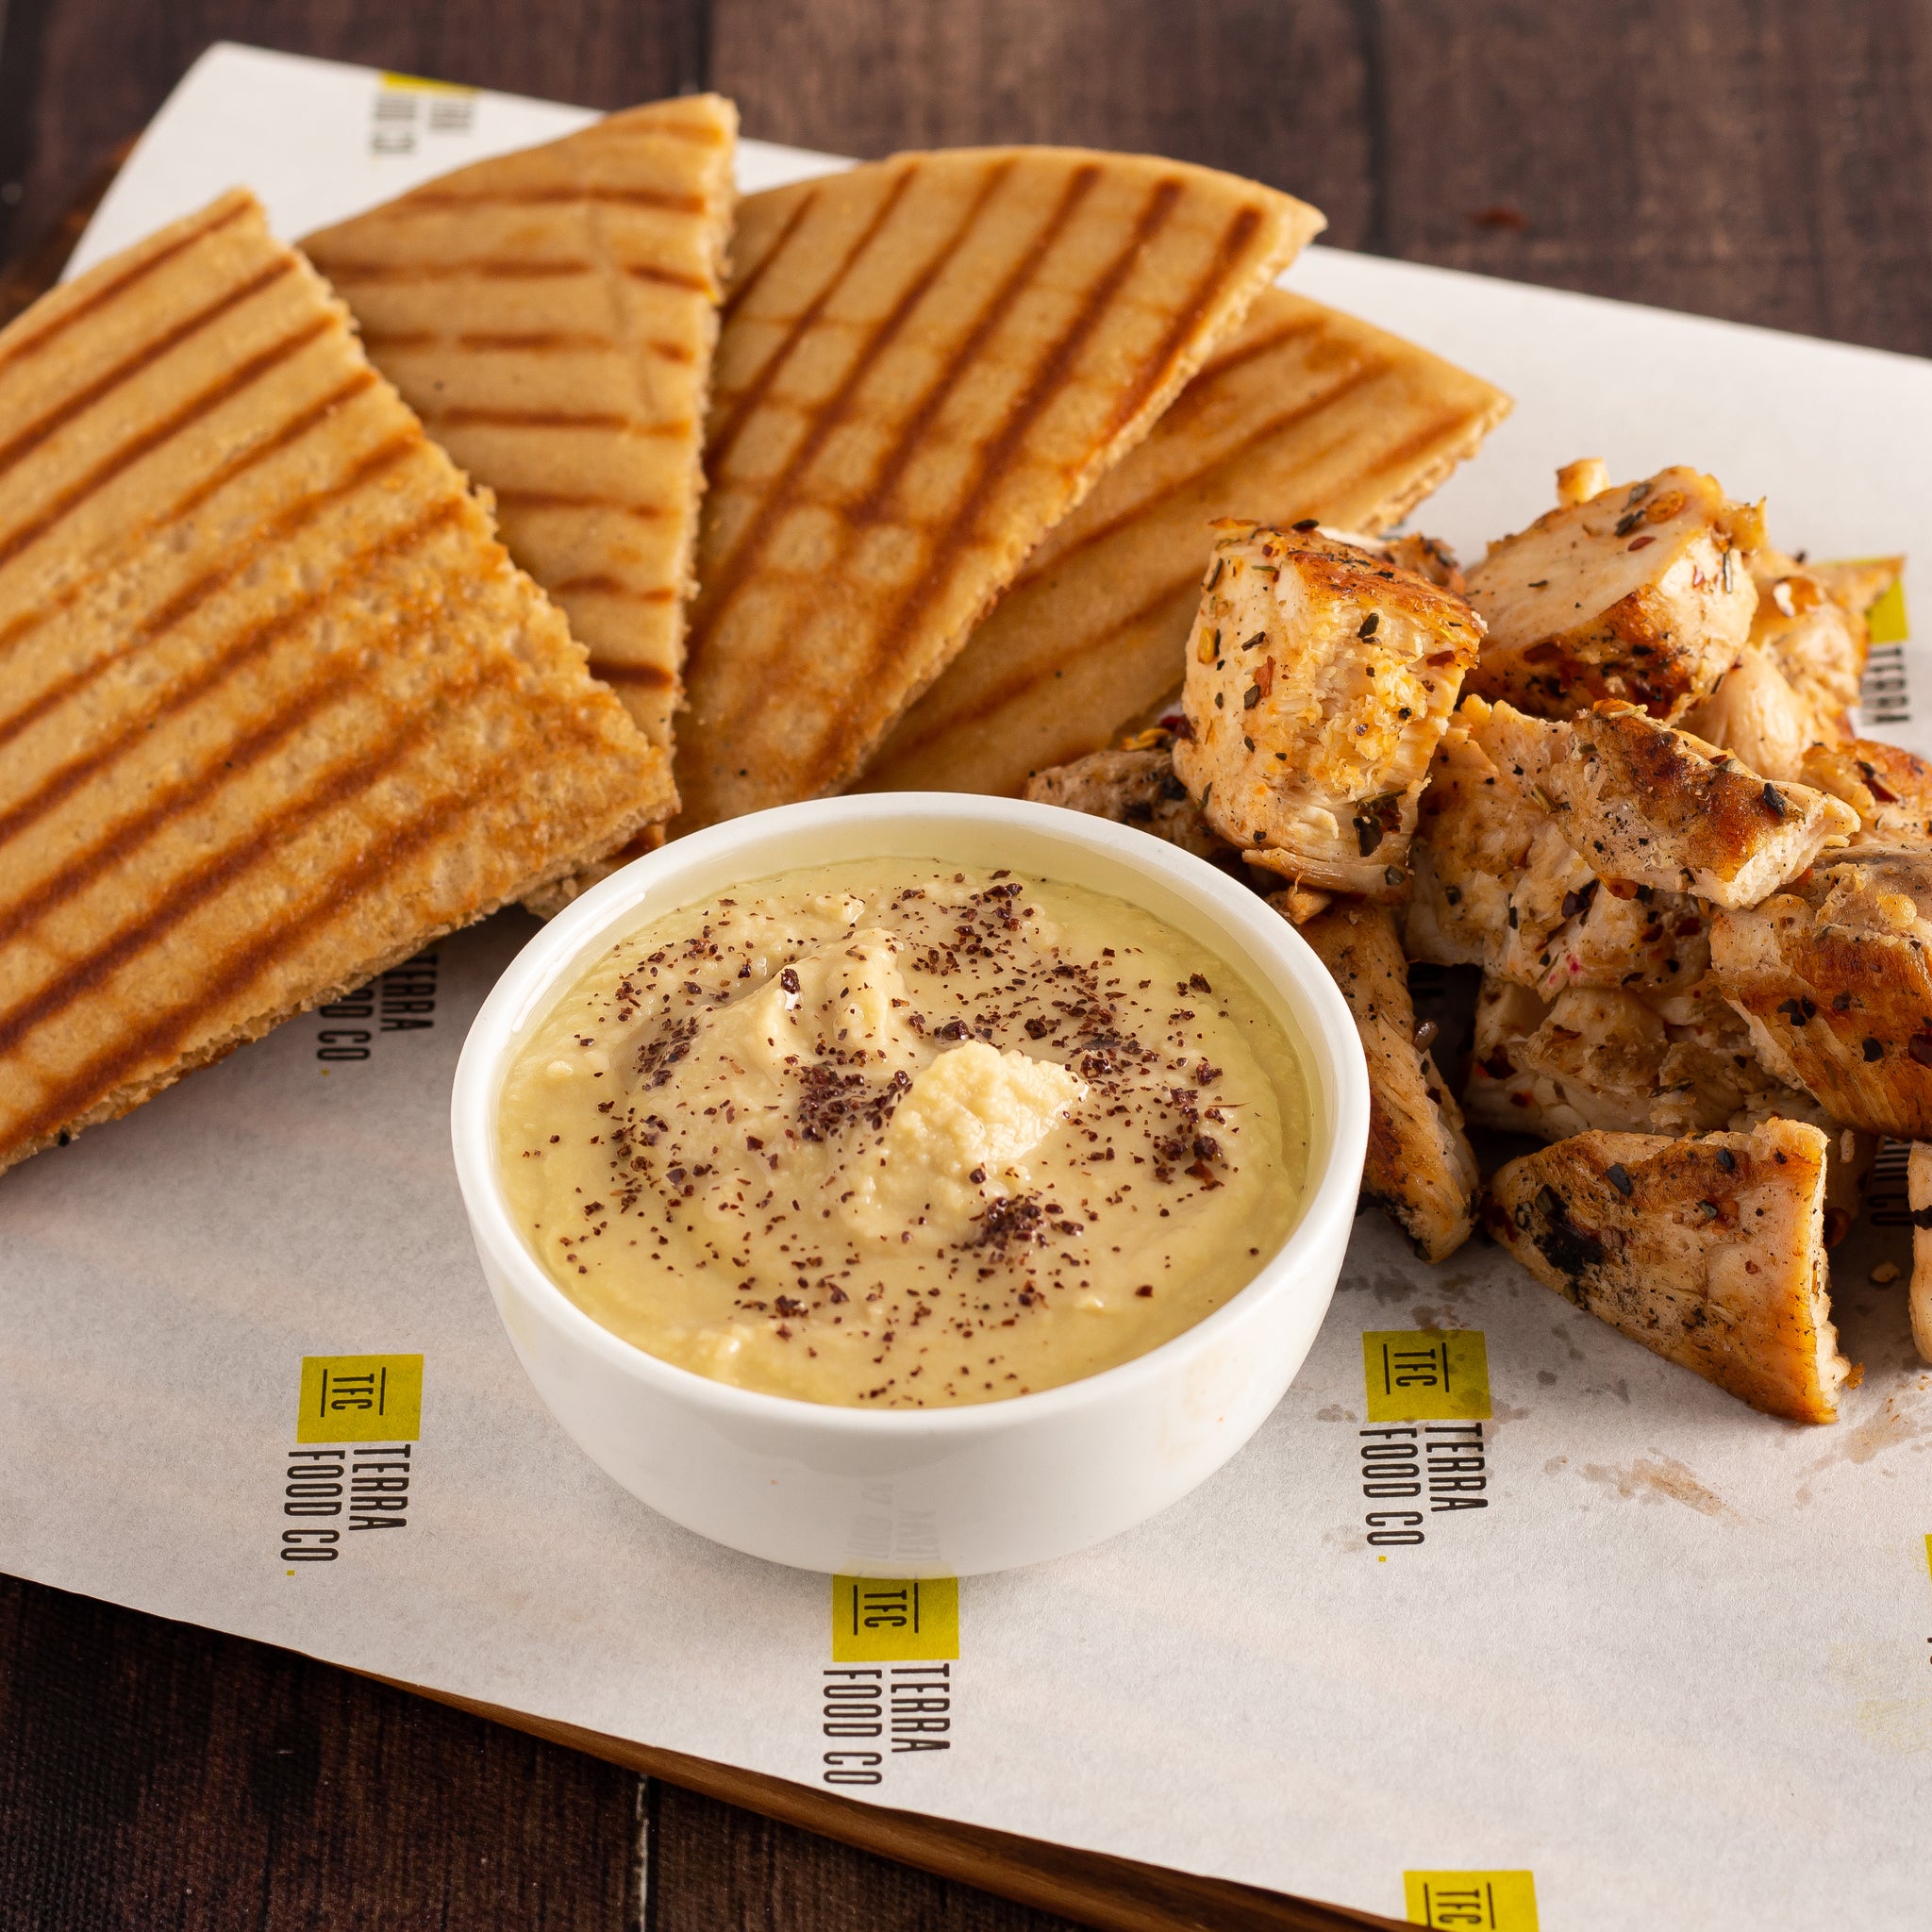 Grilled Chicken and Hummus Image